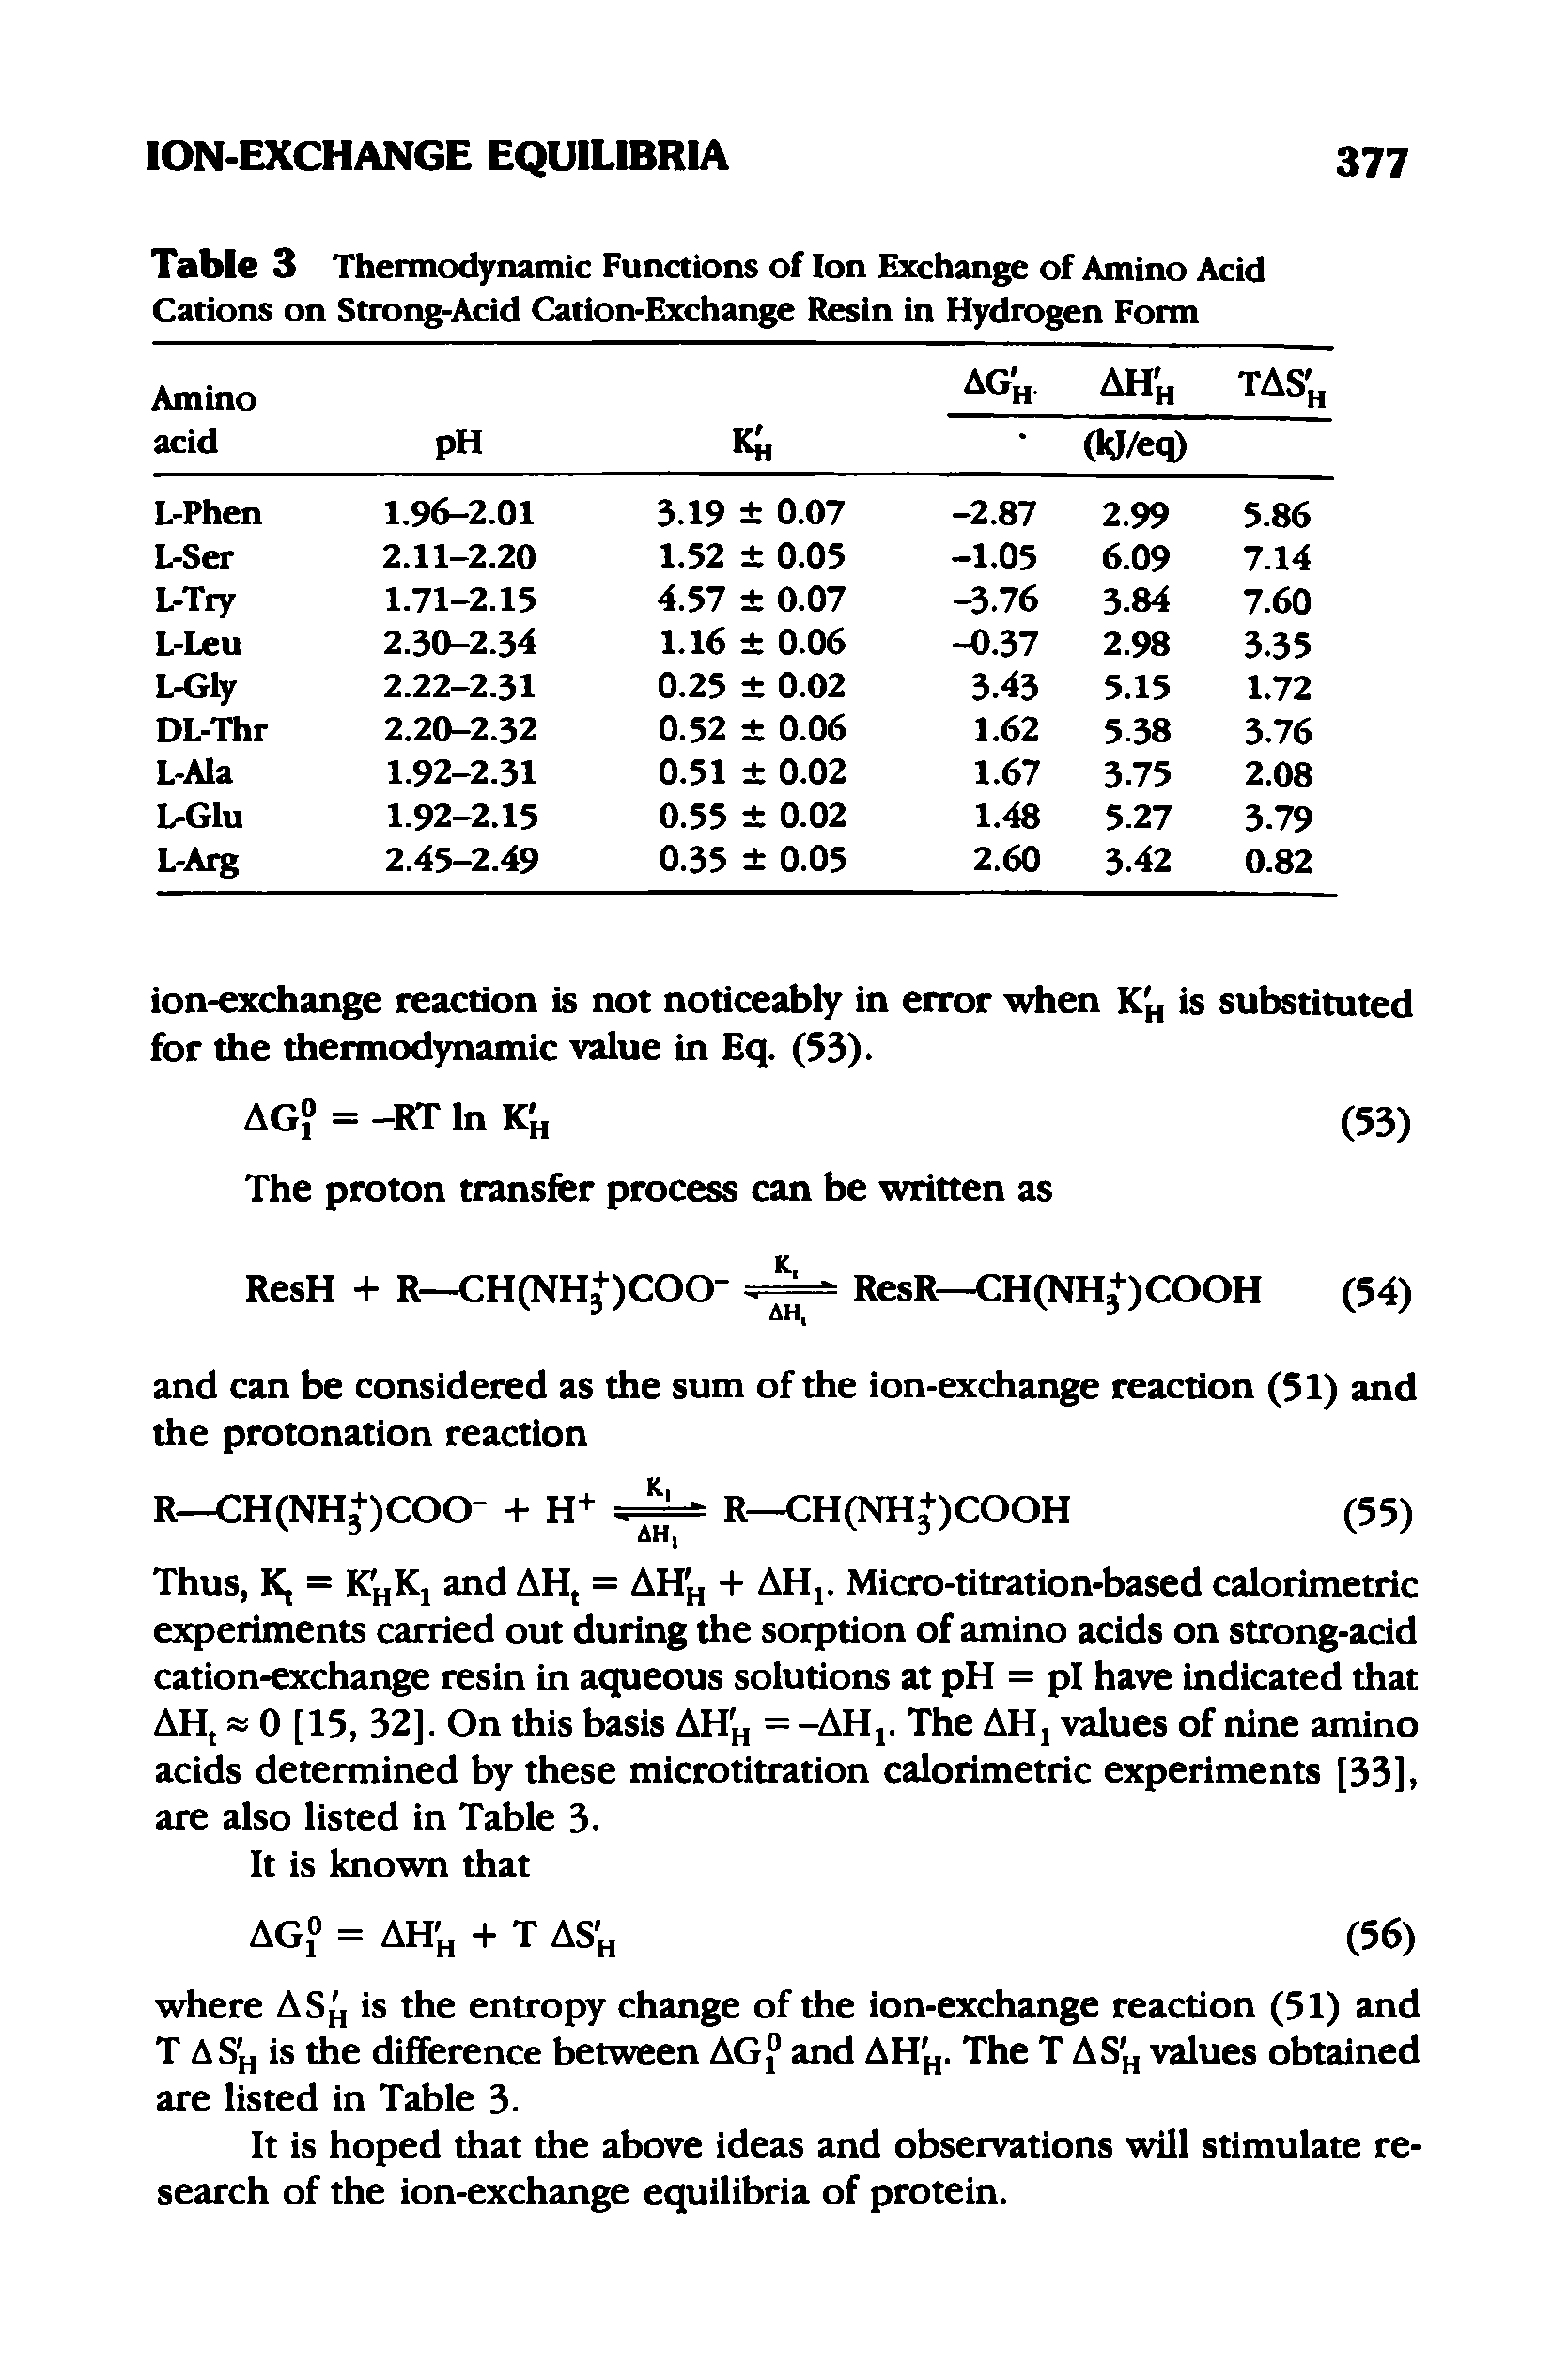 Table 3 Thermodynamic Functions of Ion Exchange of Amino Acid Cations on Strong-Acid Cation-Exchange Resin in Hydrogen Form...